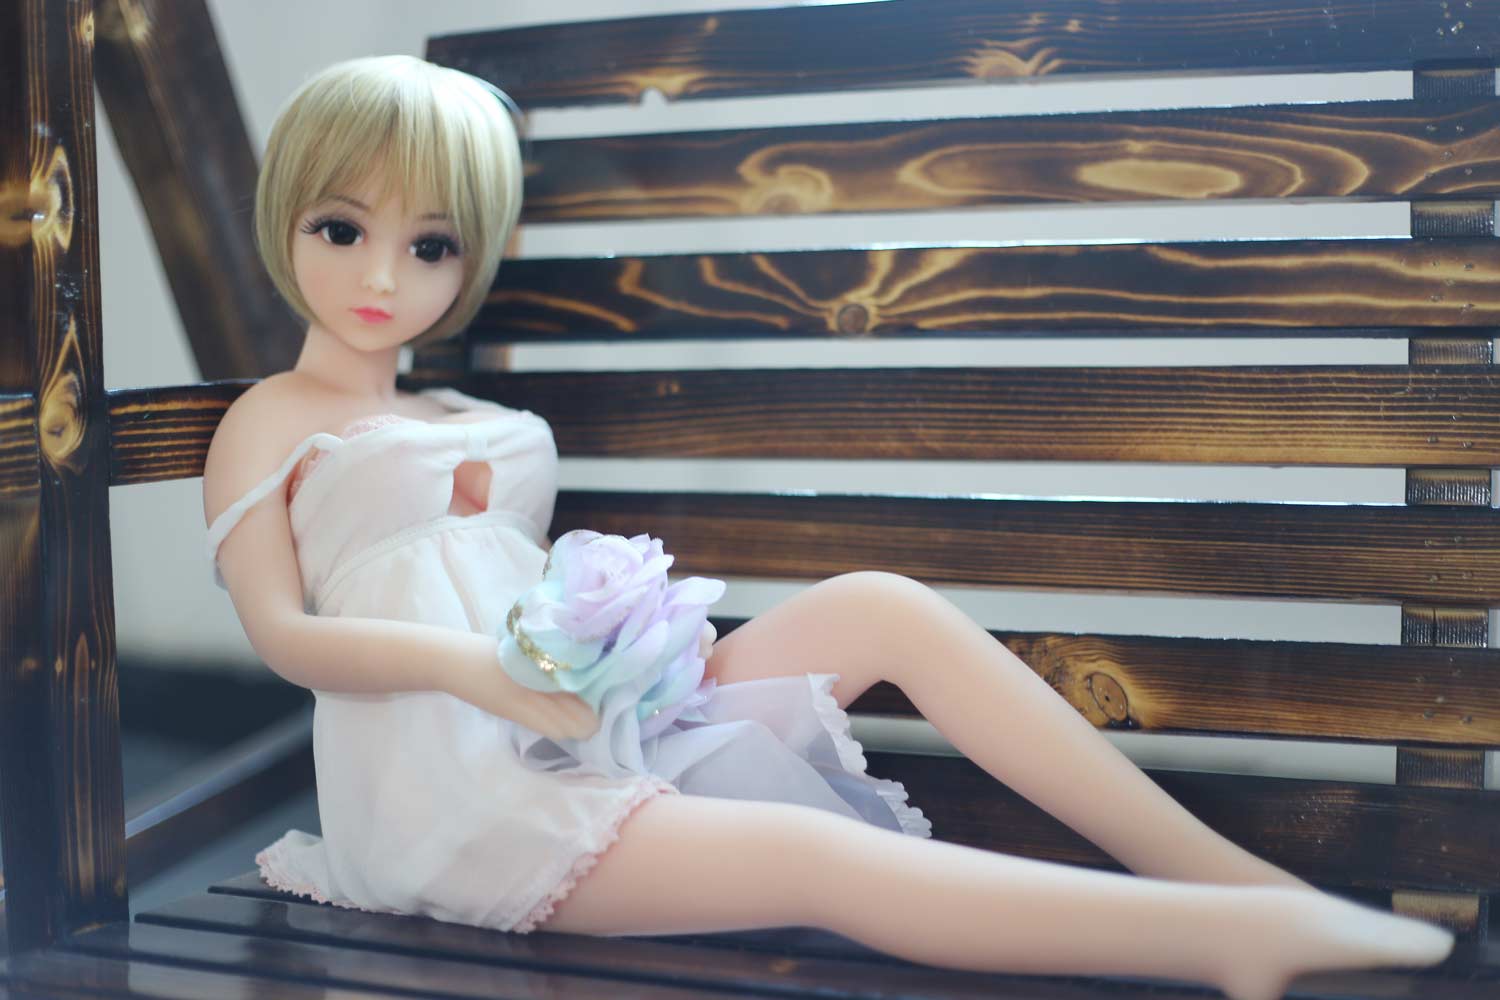 A mini sex doll sitting on a chair with a flower in the hand